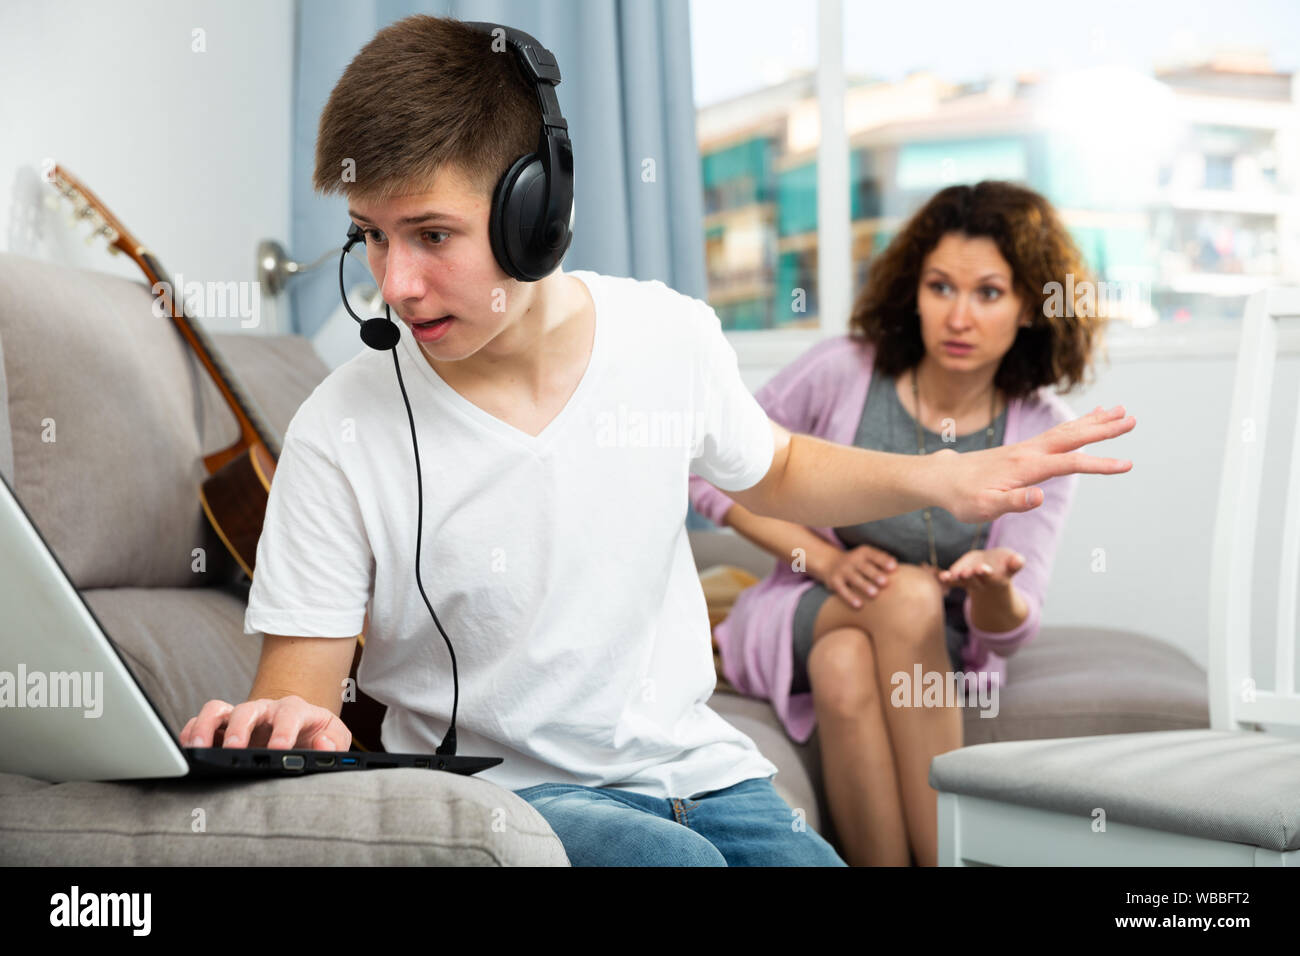 Teenage son listening music in headphones or playing online games ignoring  his mother Stock Photo - Alamy